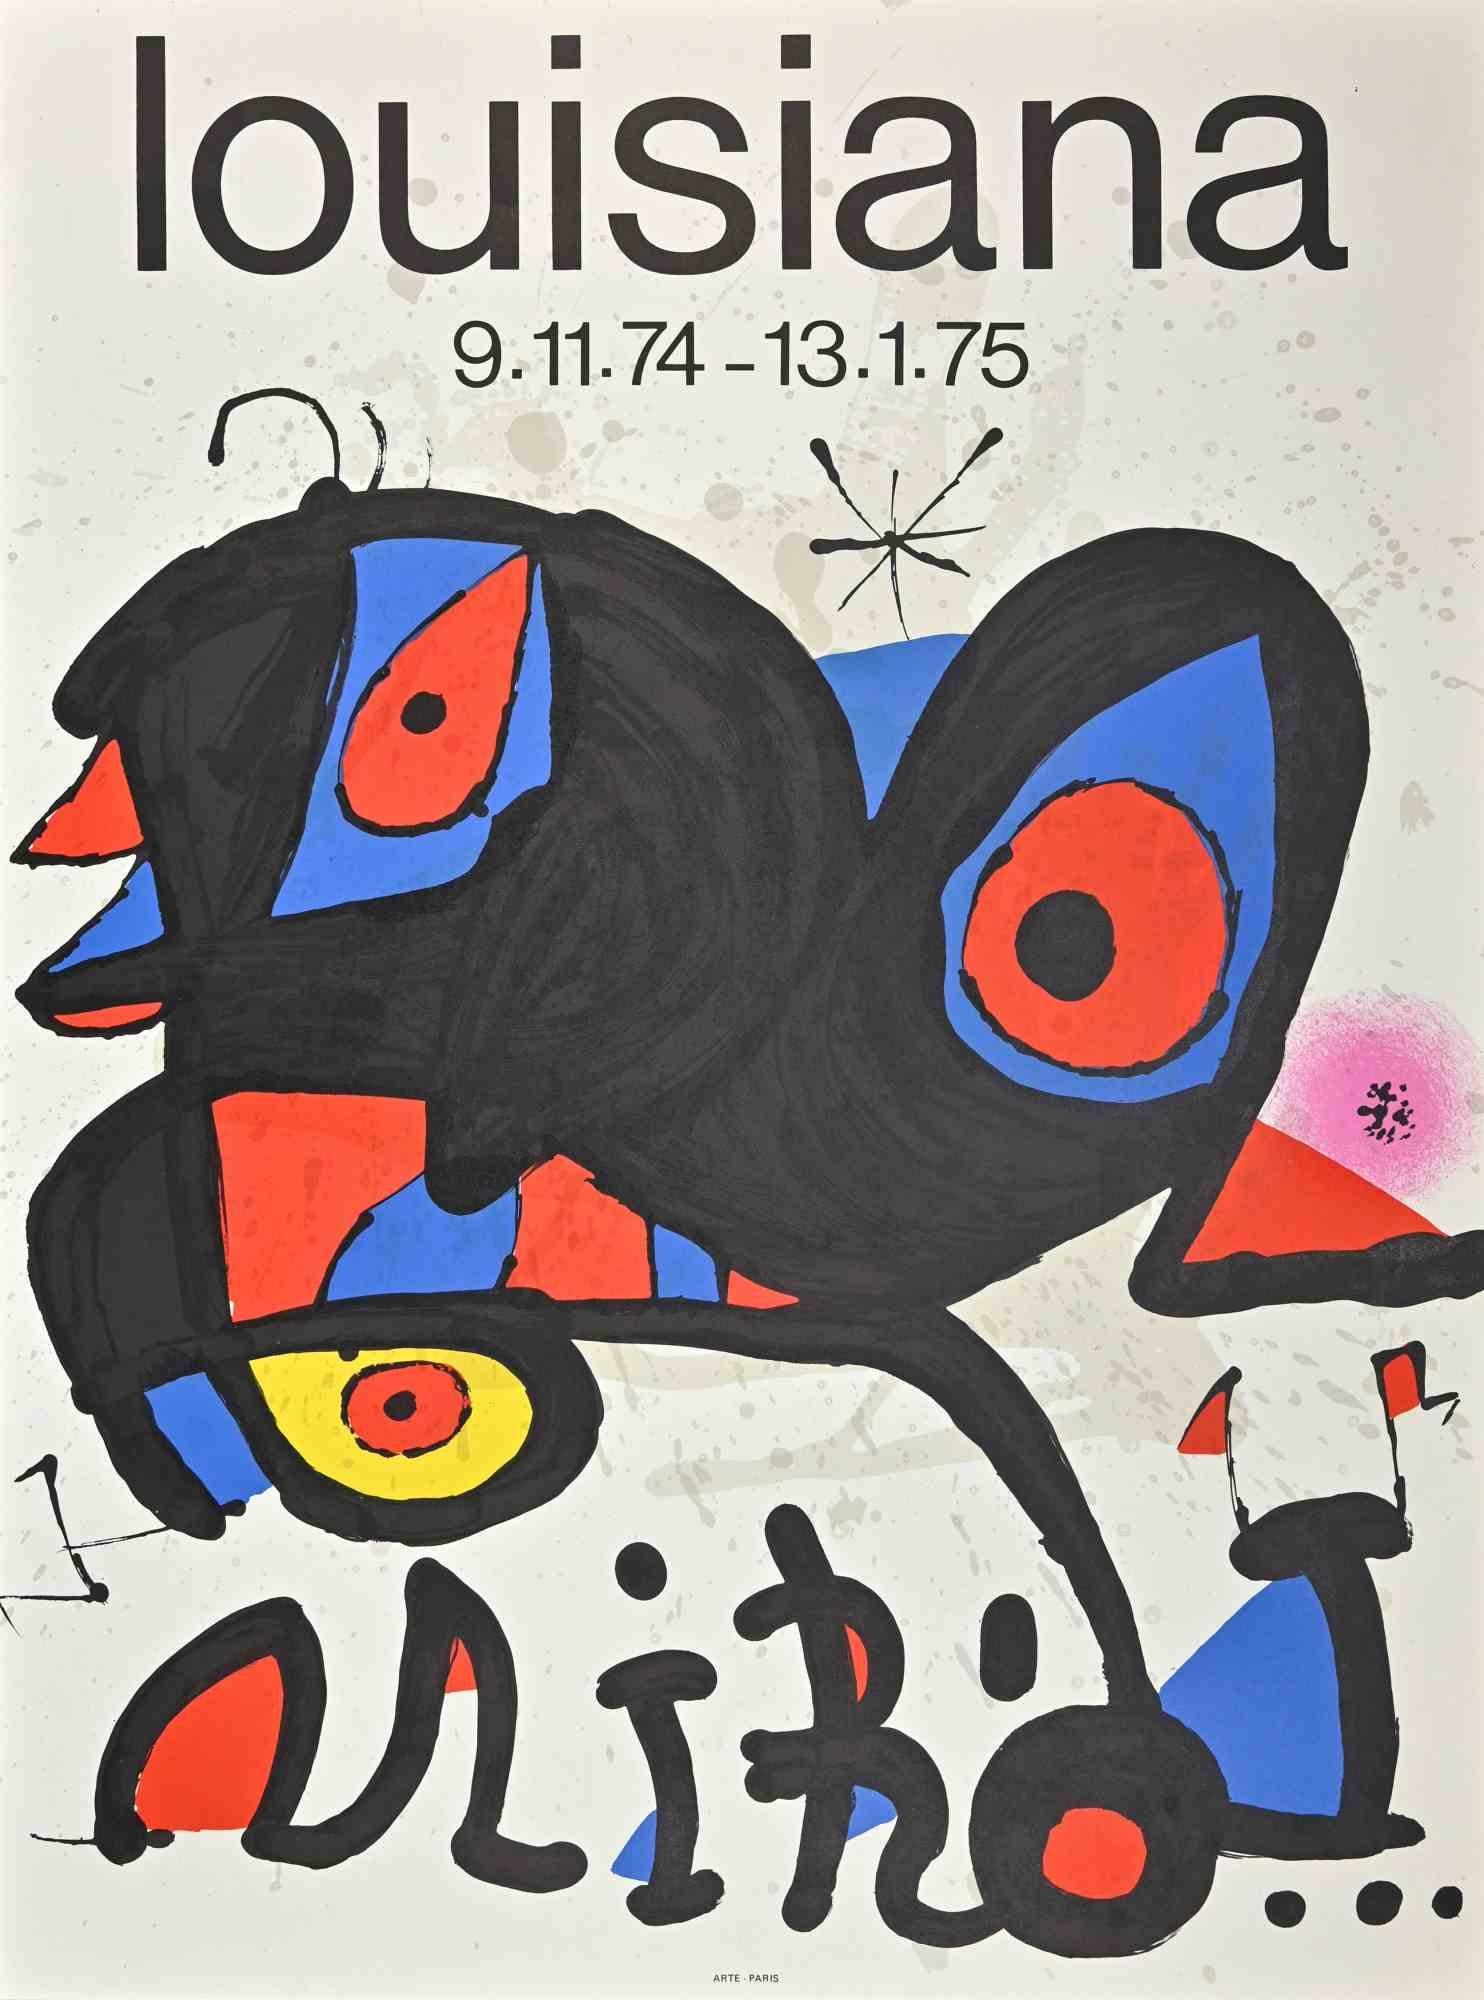 Louisiana - Lithograph and Offset poster after Joan Mirò - 1974